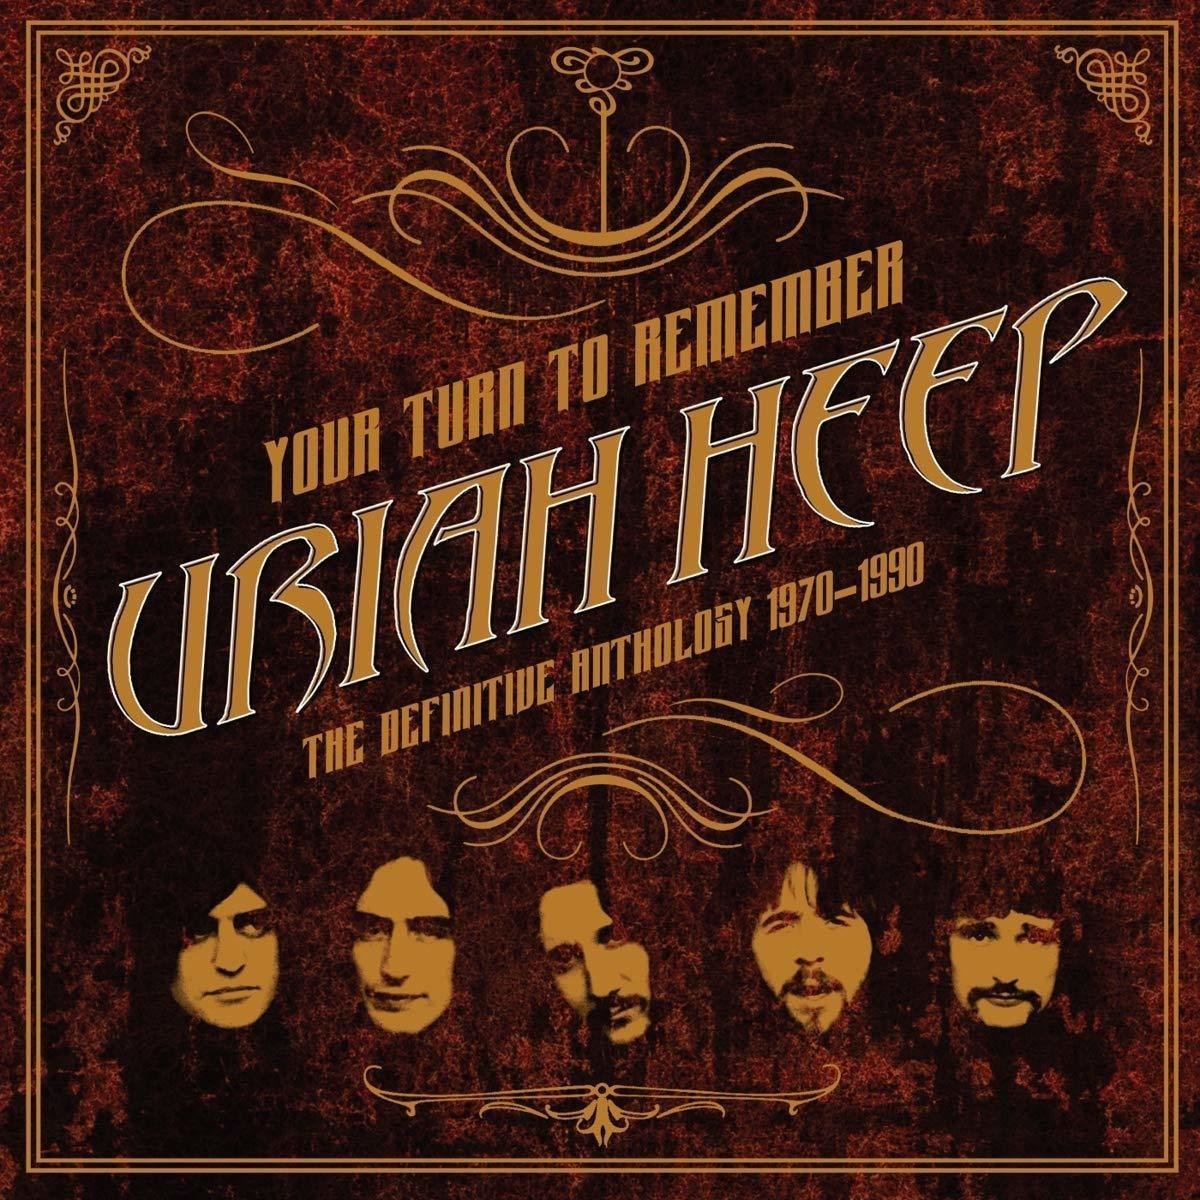 LP Uriah Heep - Your Turn To Remember: The Definitive Anthology 1970-1990 (LP)